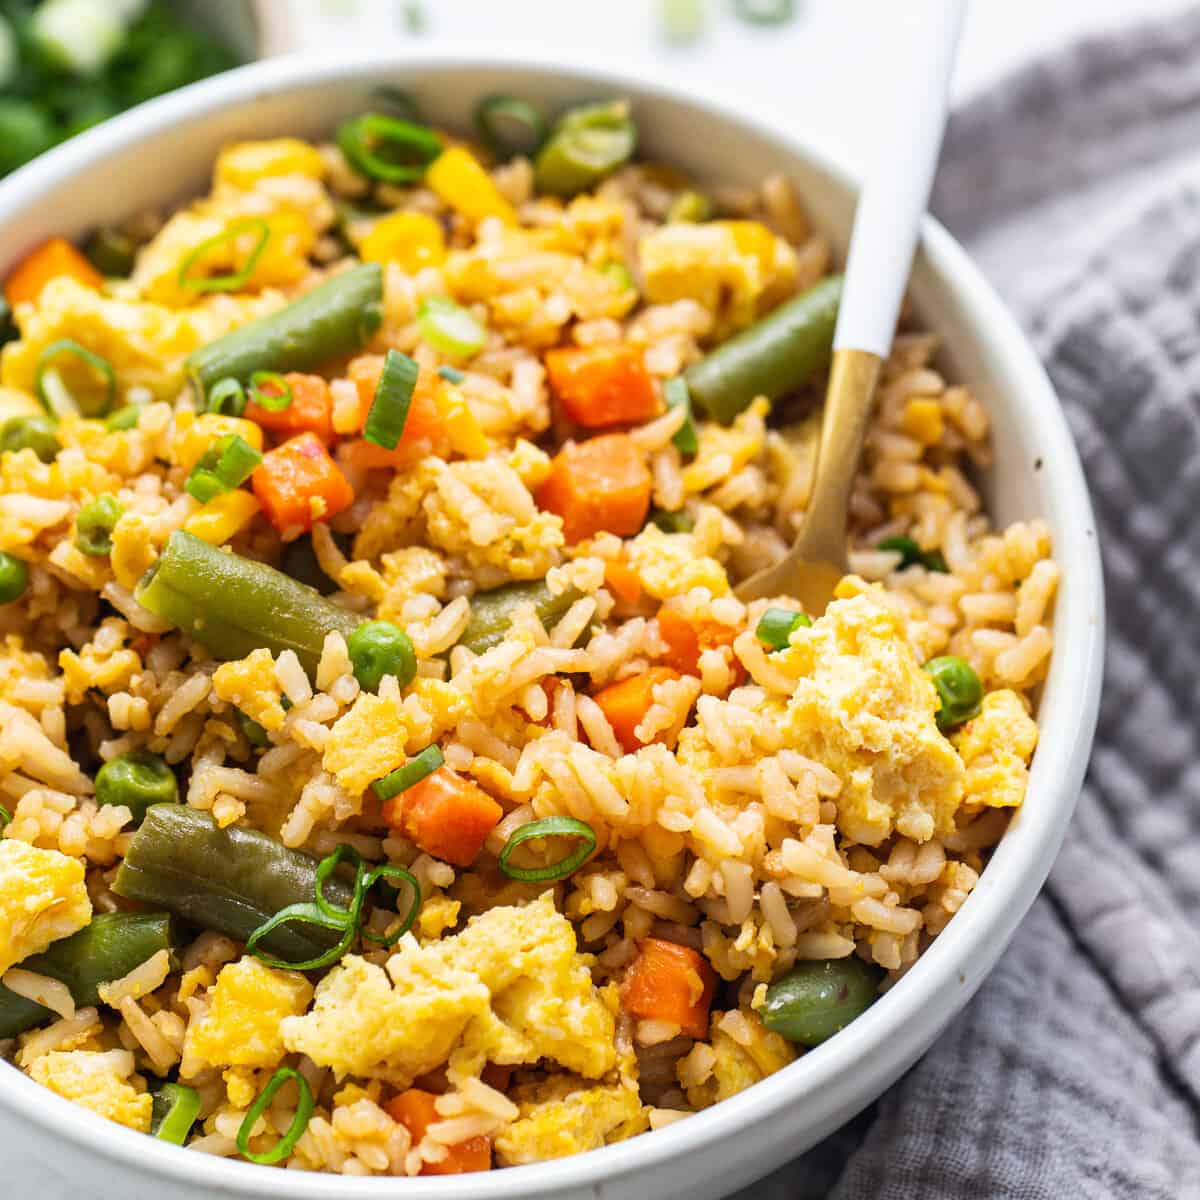 https://fitfoodiefinds.com/wp-content/uploads/2023/03/Instant-Pot-Fried-Rice-sq.jpg